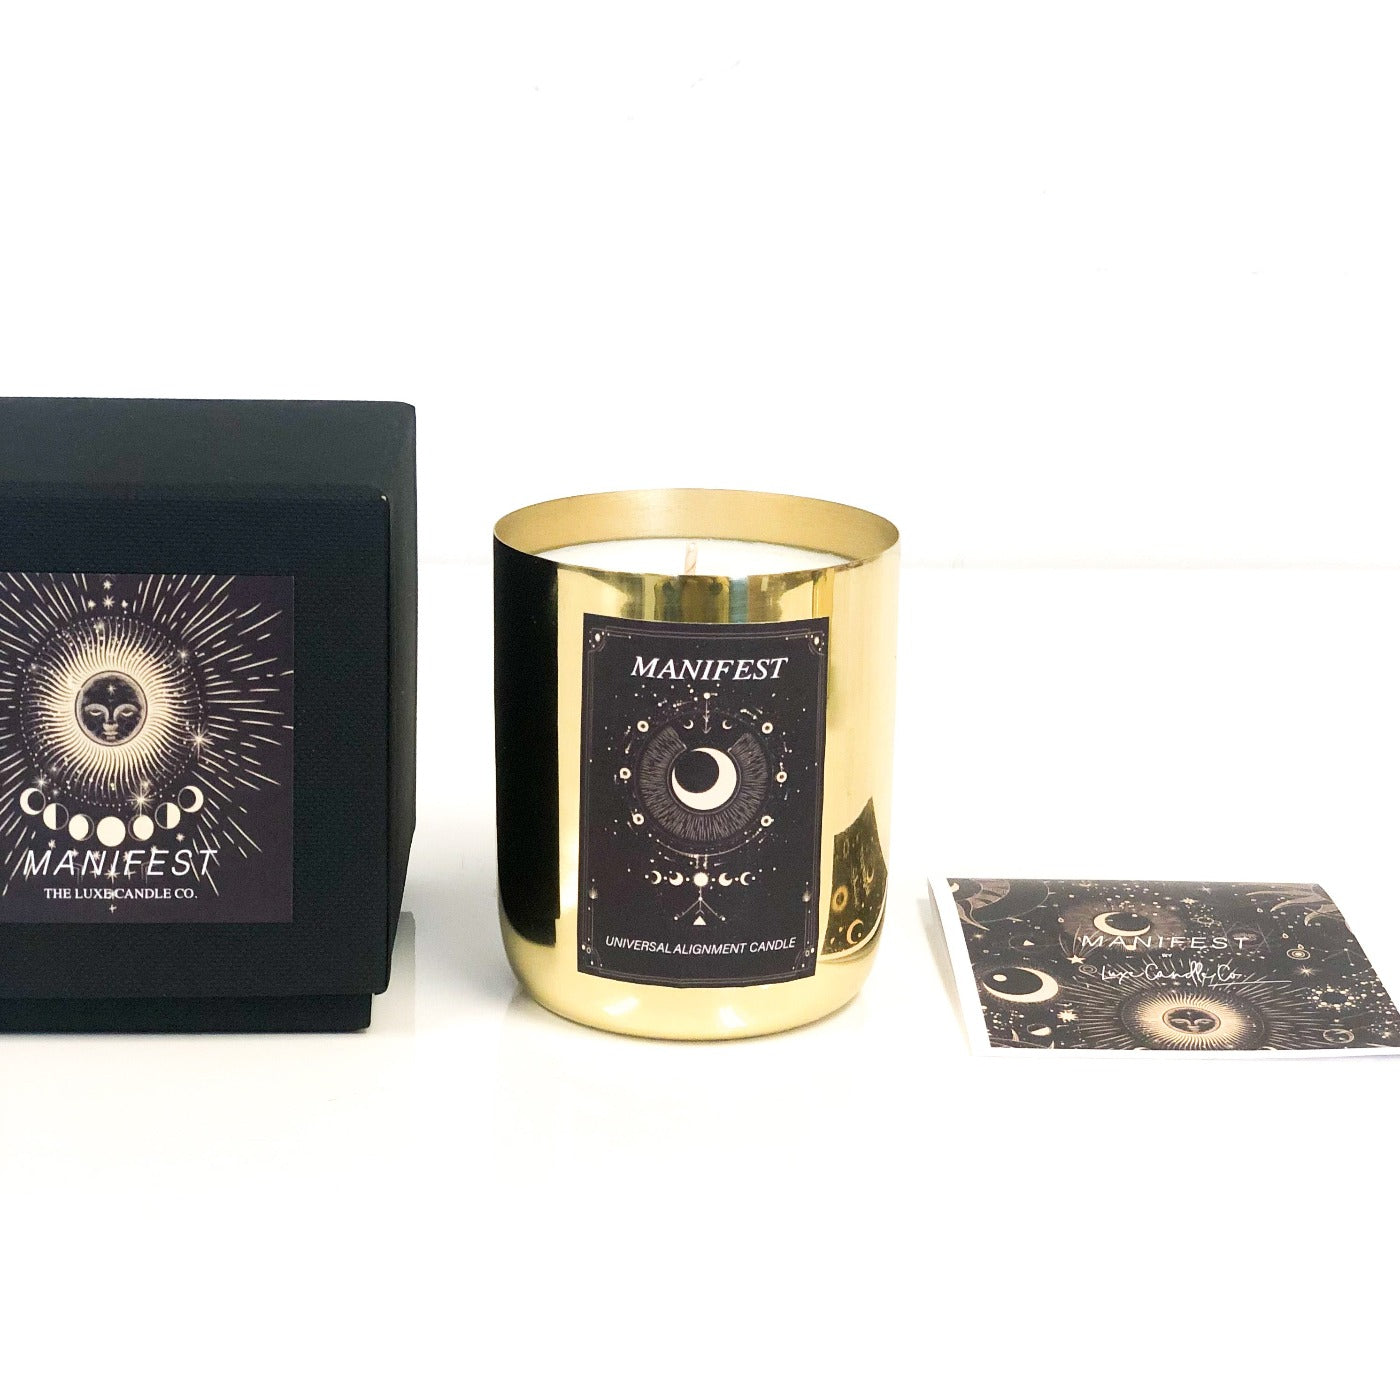 Gold candle scented with Palo Santo to manifest, align with universal energy and get back to you by The Luxe Candle Co